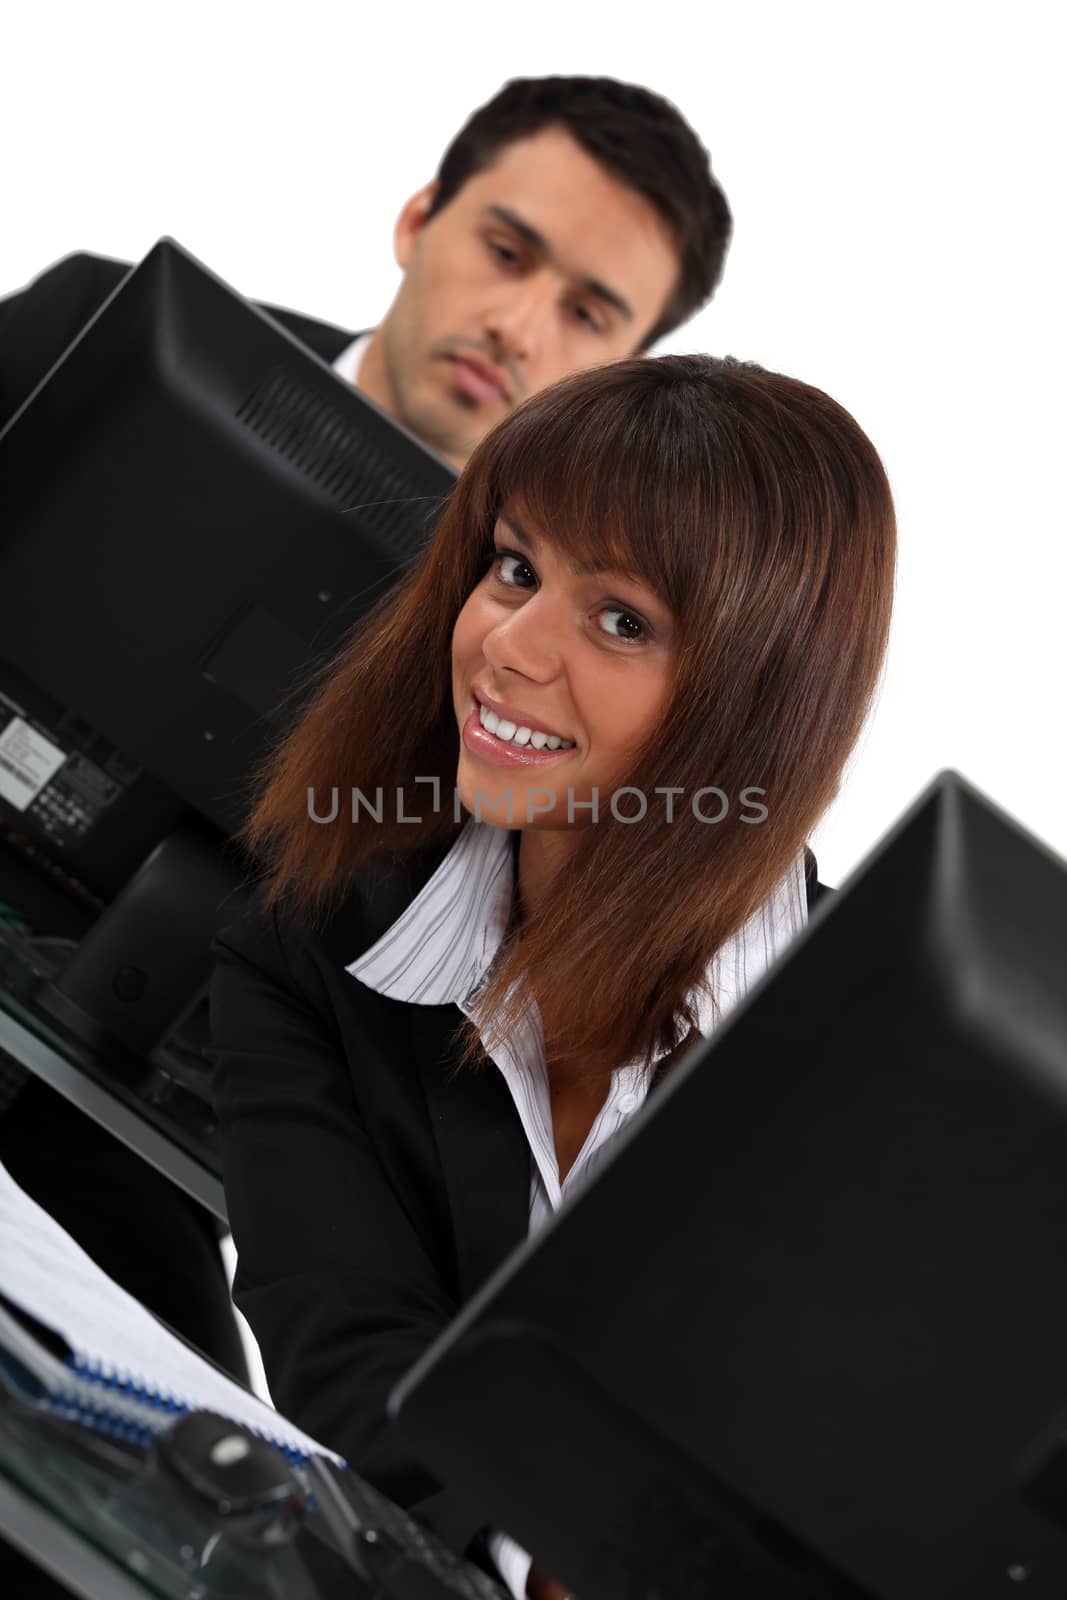 Woman peeking out from computer by phovoir